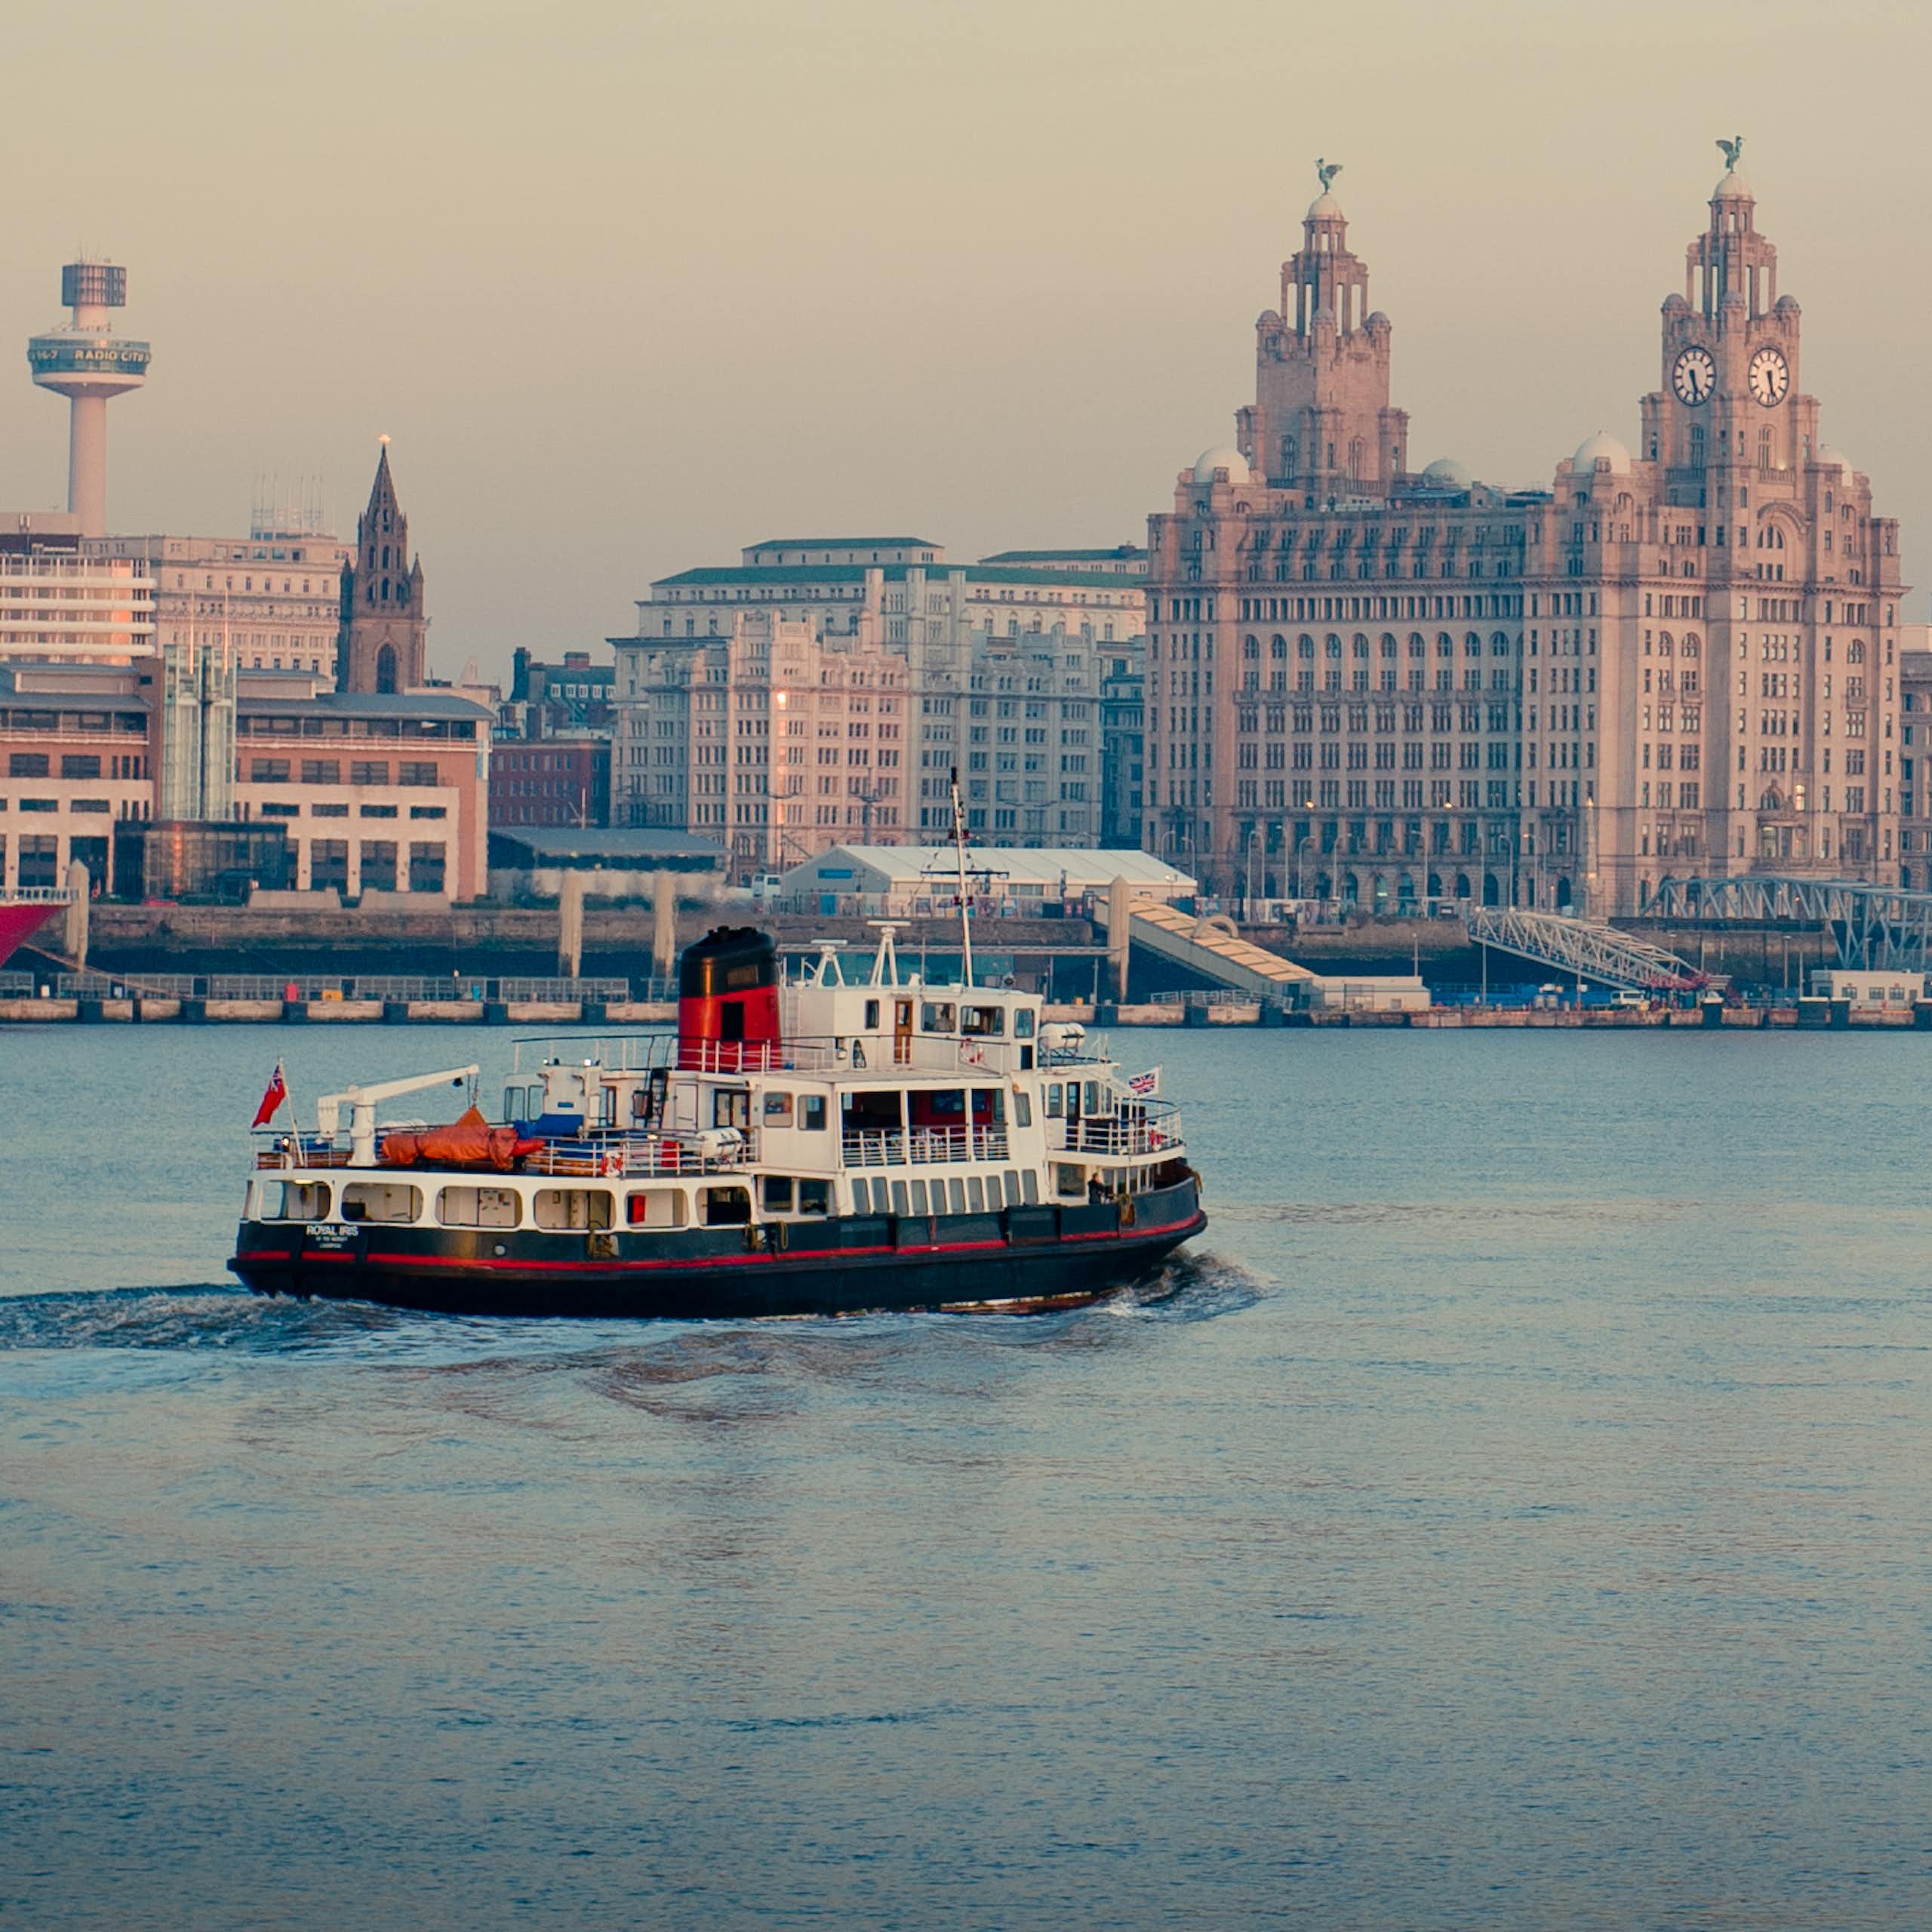 Mersey ferry boat moving across on river, urban Liverpool skyline in background with lots of distinctive landmark buildings, grey sky